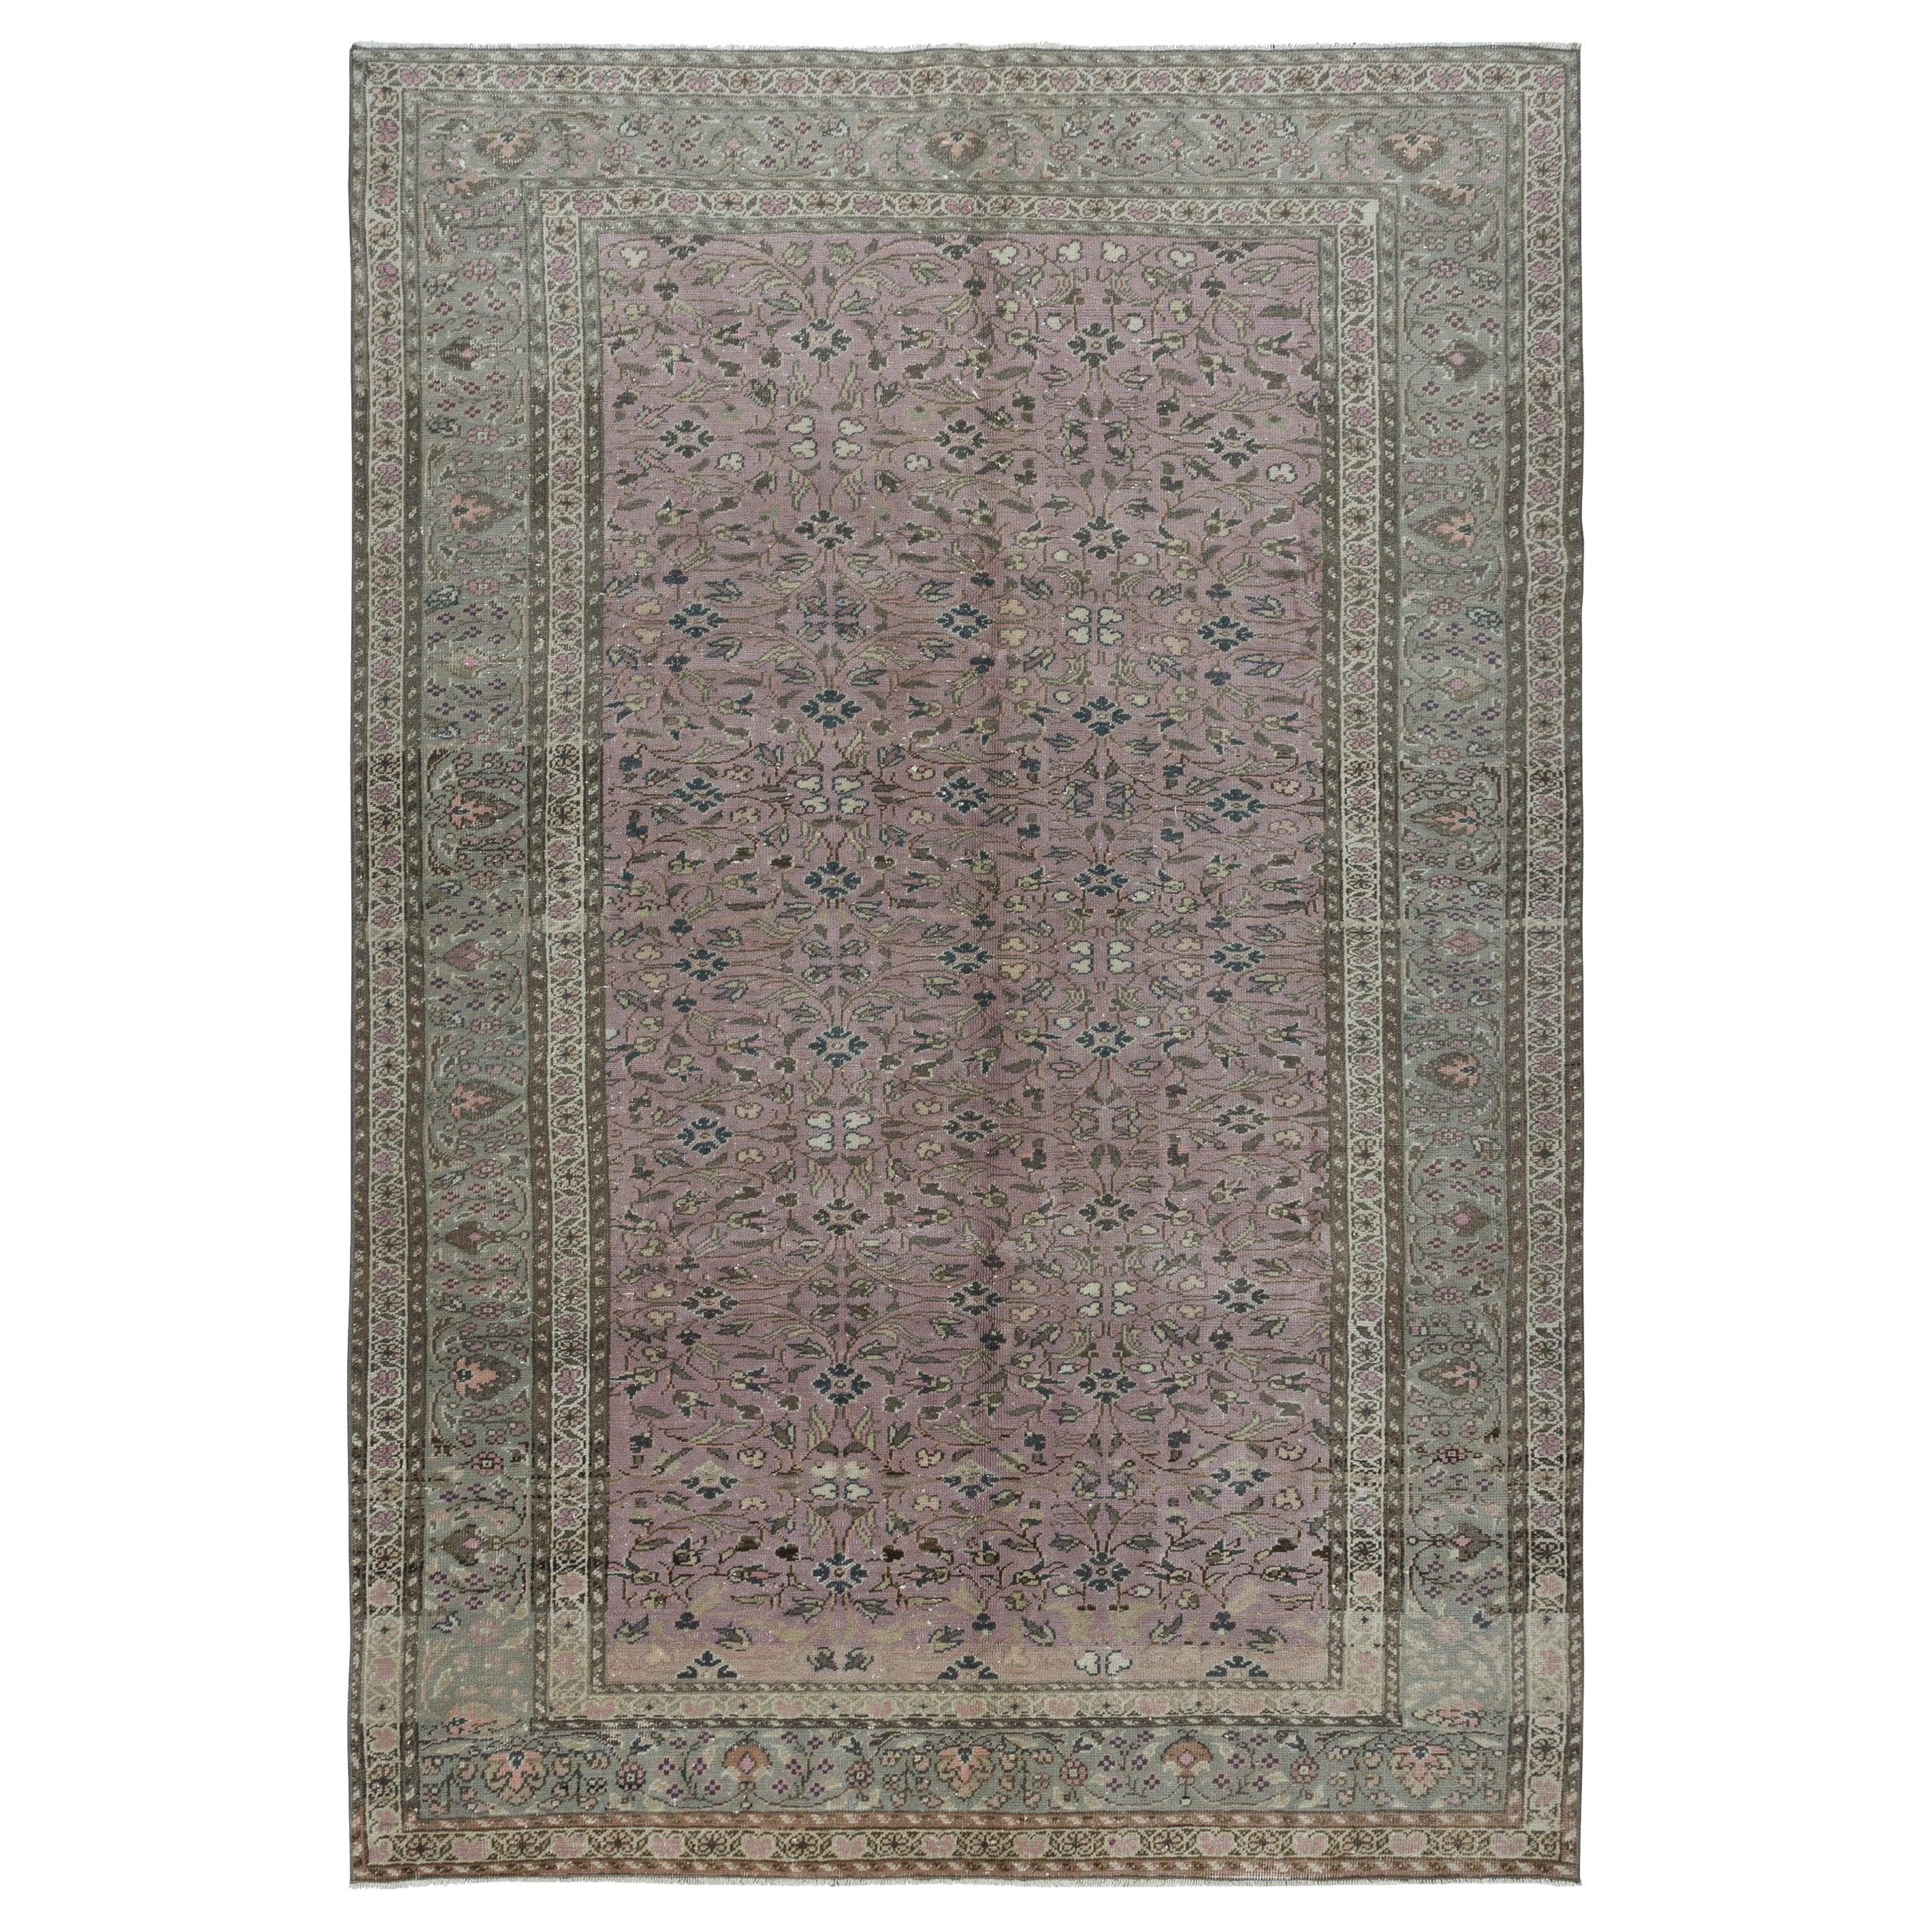 5.5x8.2 Ft Traditional Vintage Handmade Turkish Area Rug with Floral Design